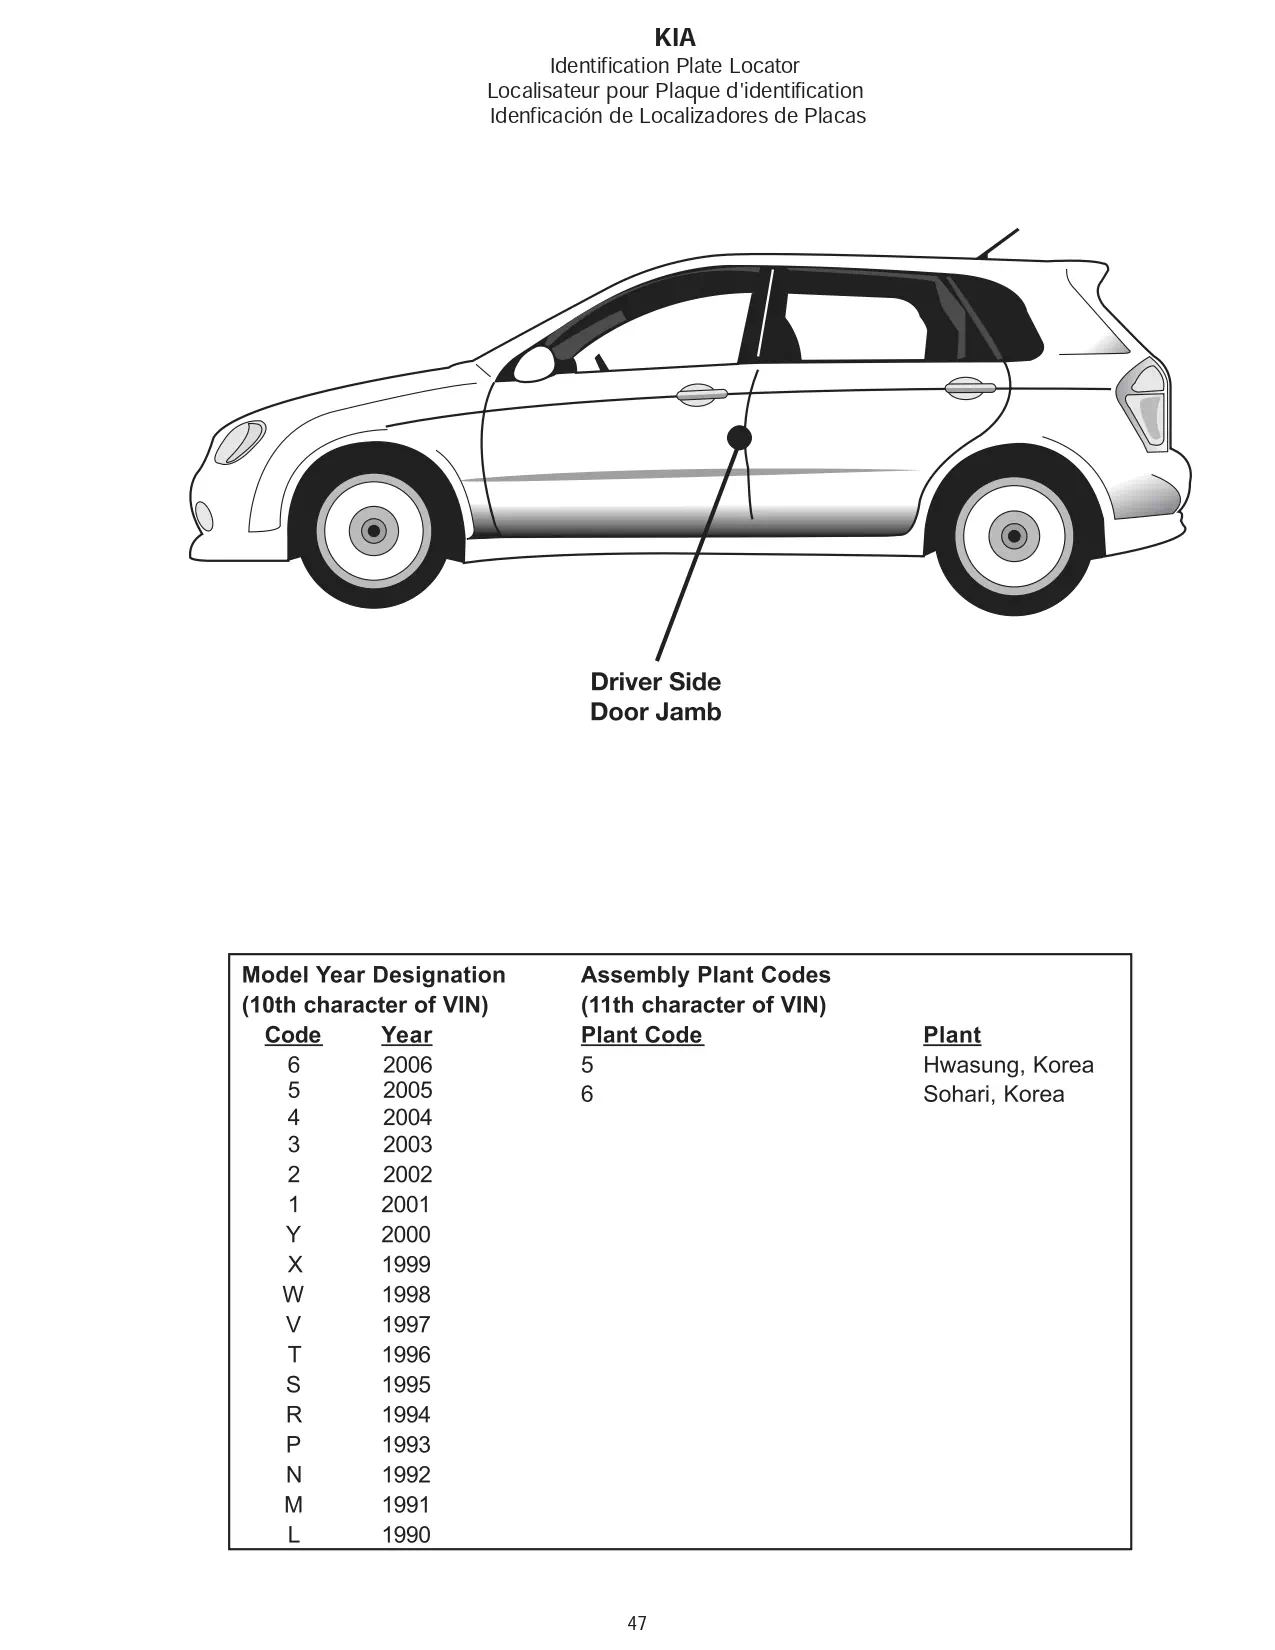 a kia car and a paint code locations